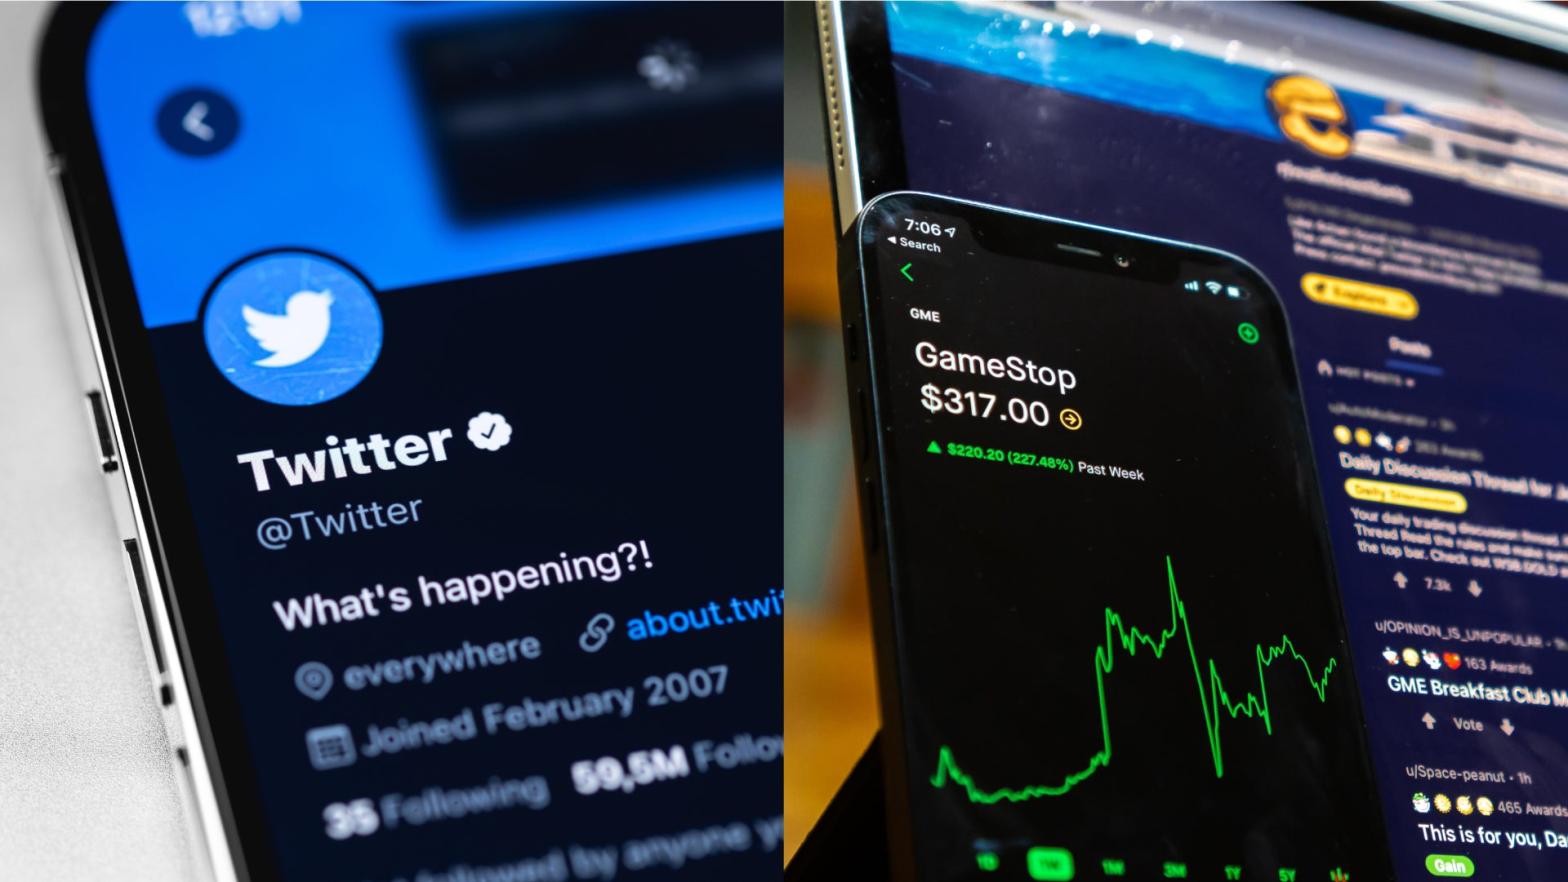 Twitter's new feature can send users to Robinhood, an investment company that faced backlash for a GameStop trading controversy in 2021. (Image: Primakov, Shutterstock,Image: Hanson L, Shutterstock)